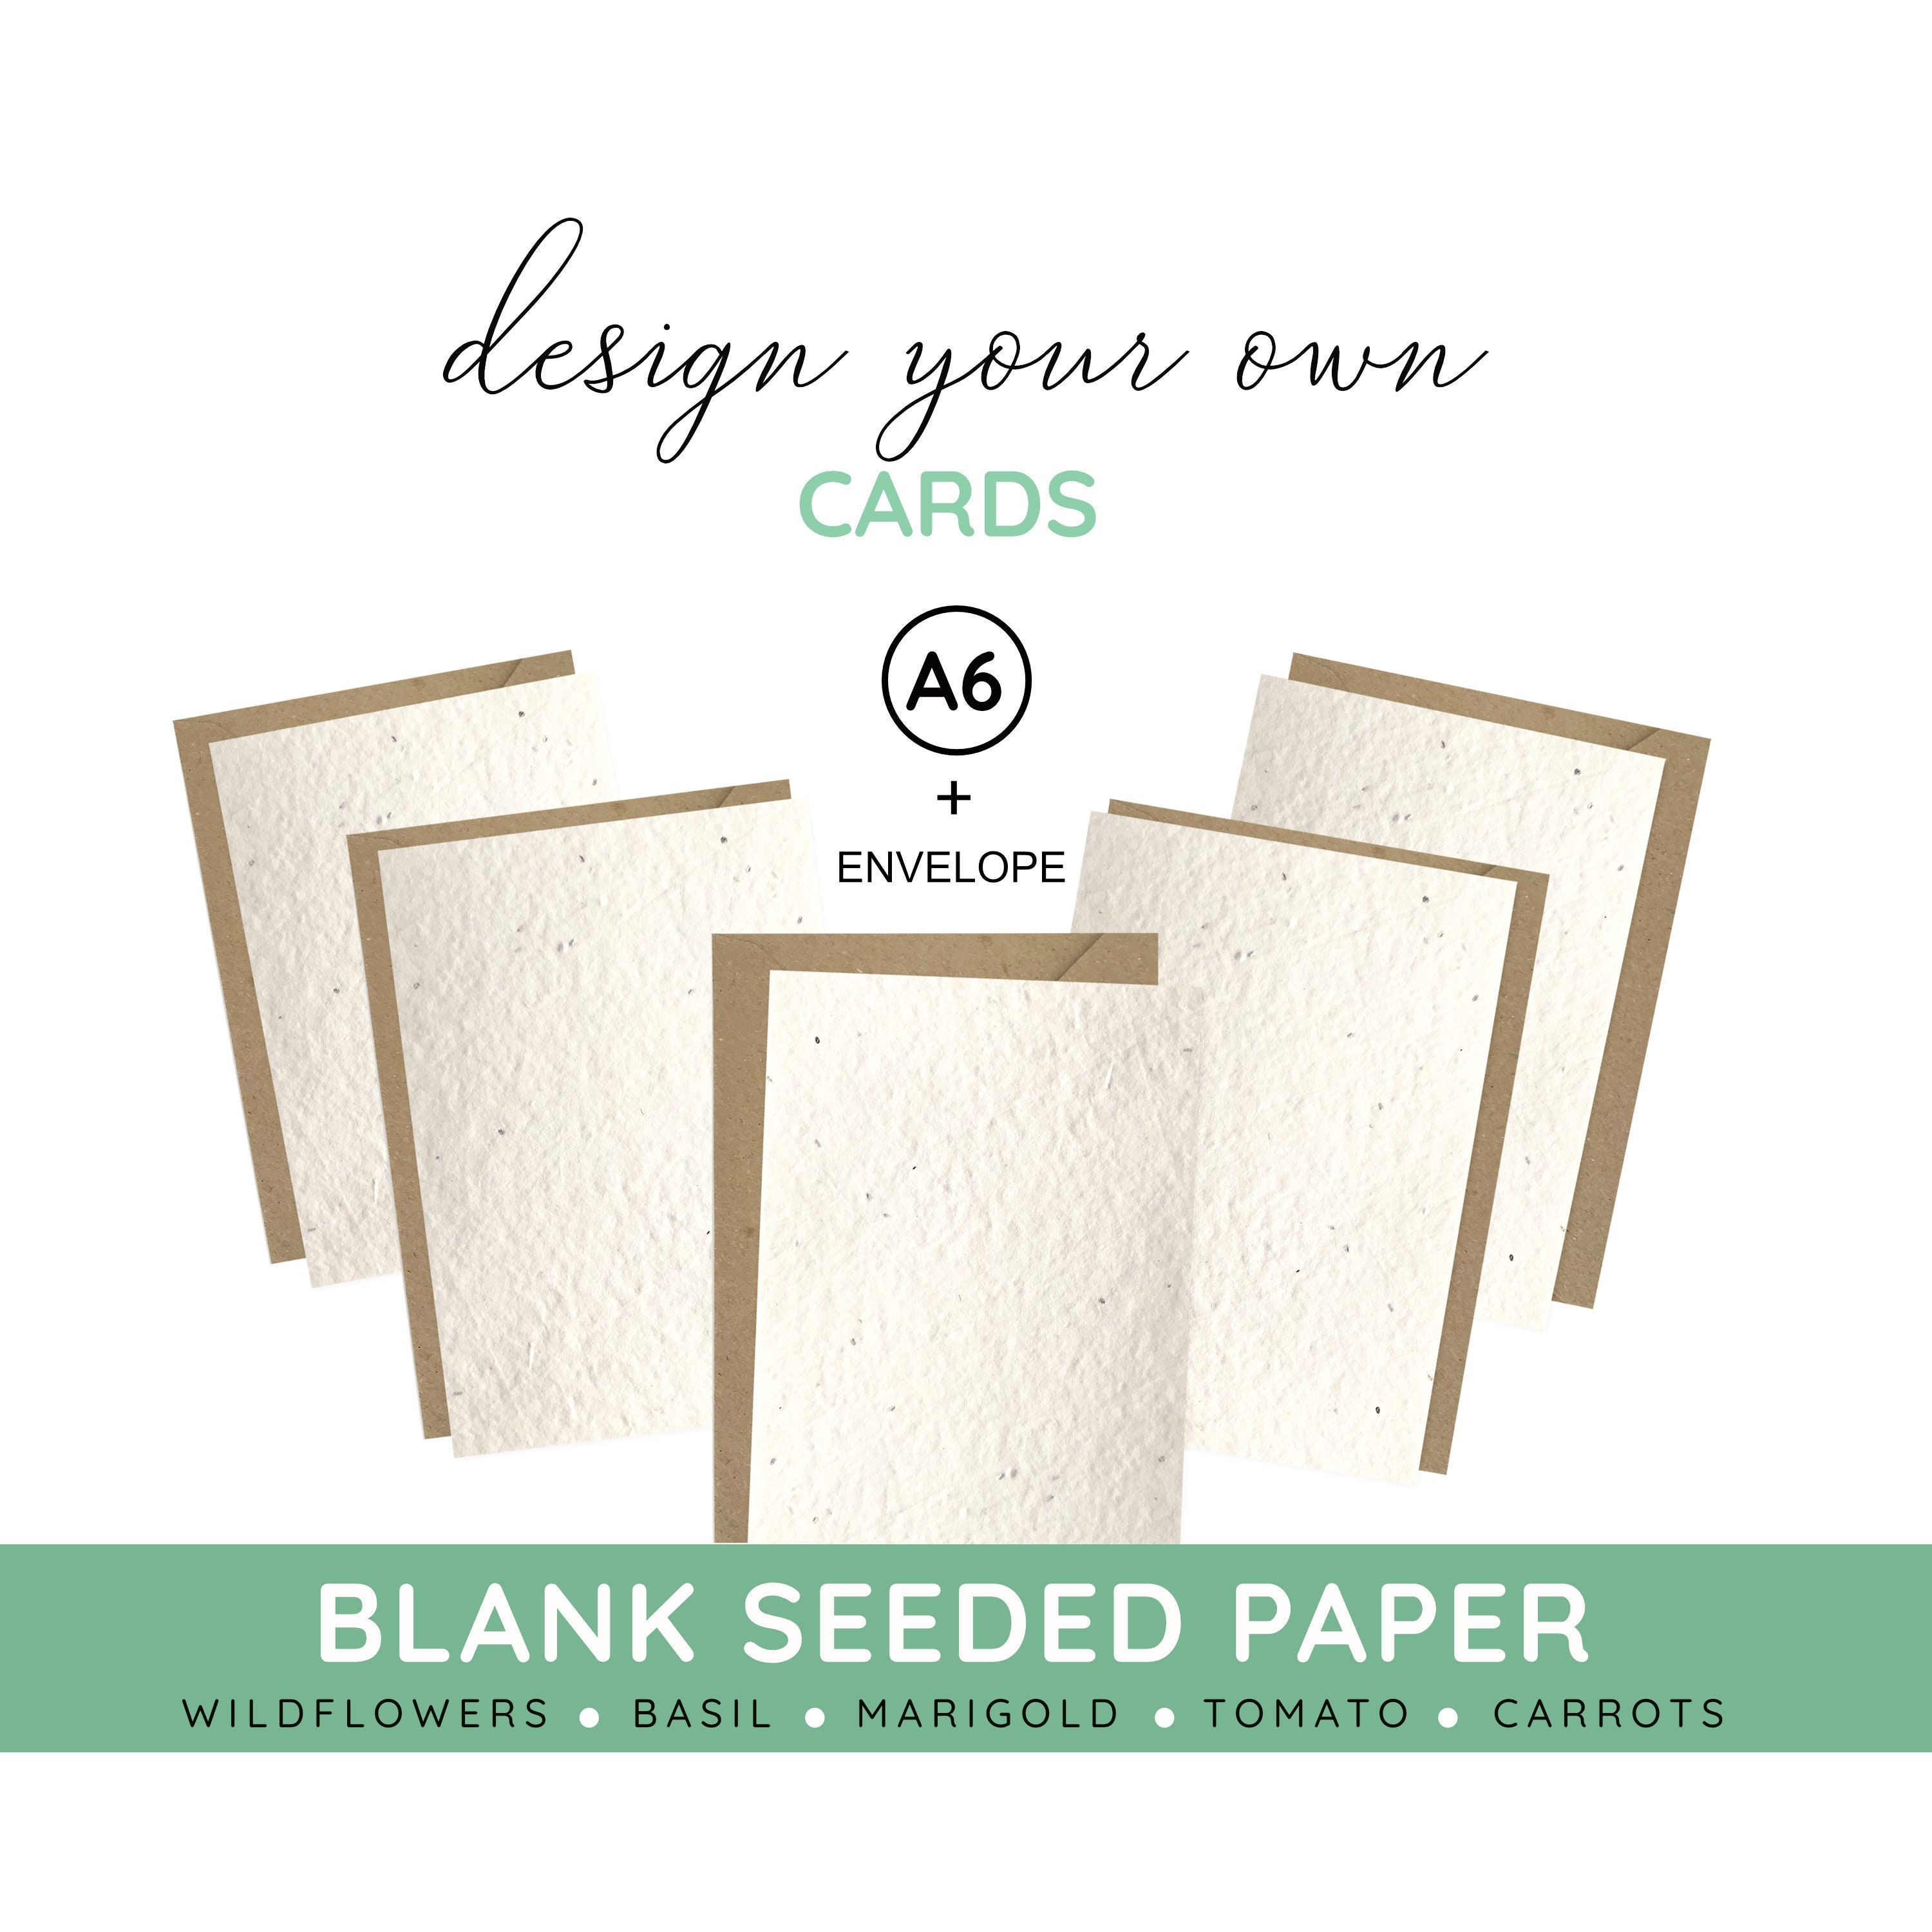 Premium White Seed Paper - Blank Sheets - 8.5x11